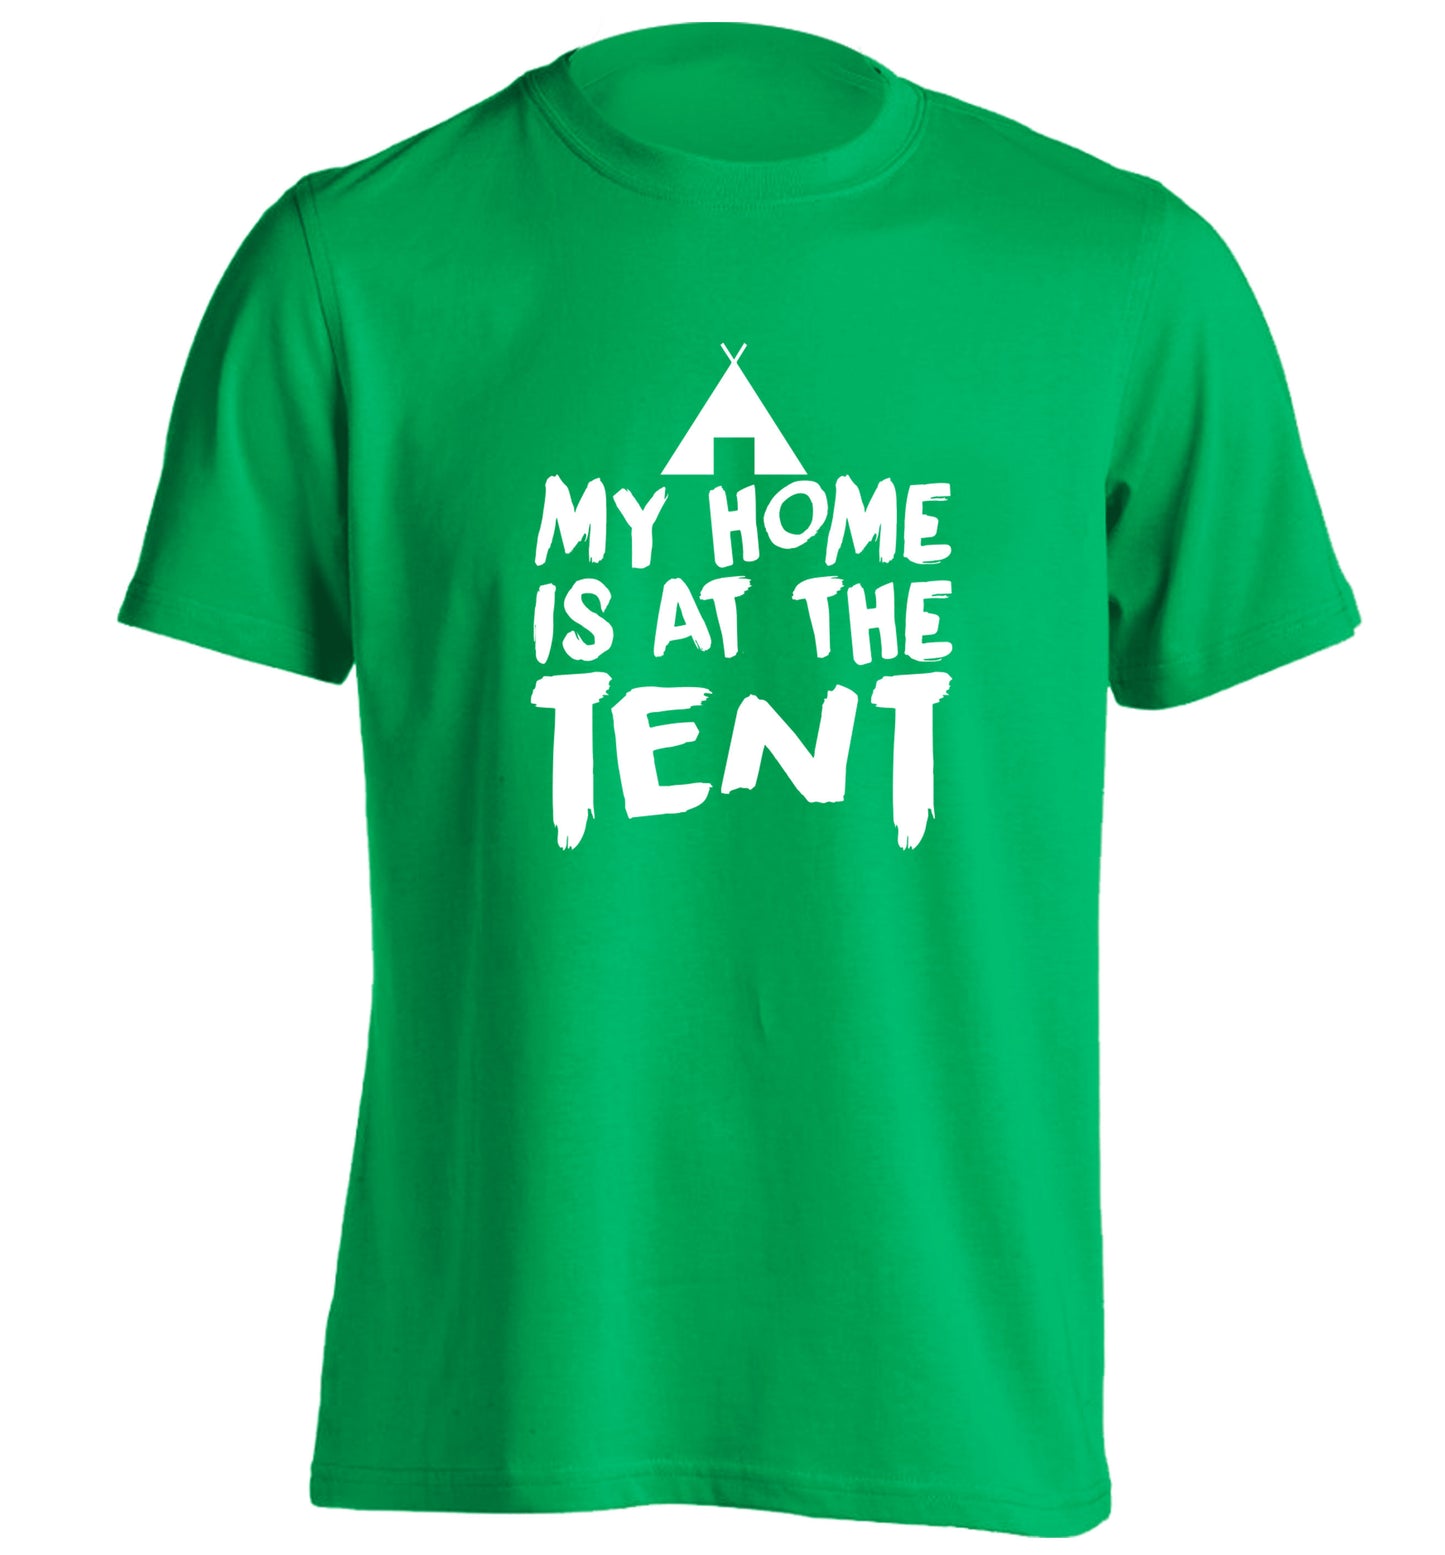 My home is at the tent adults unisex green Tshirt 2XL